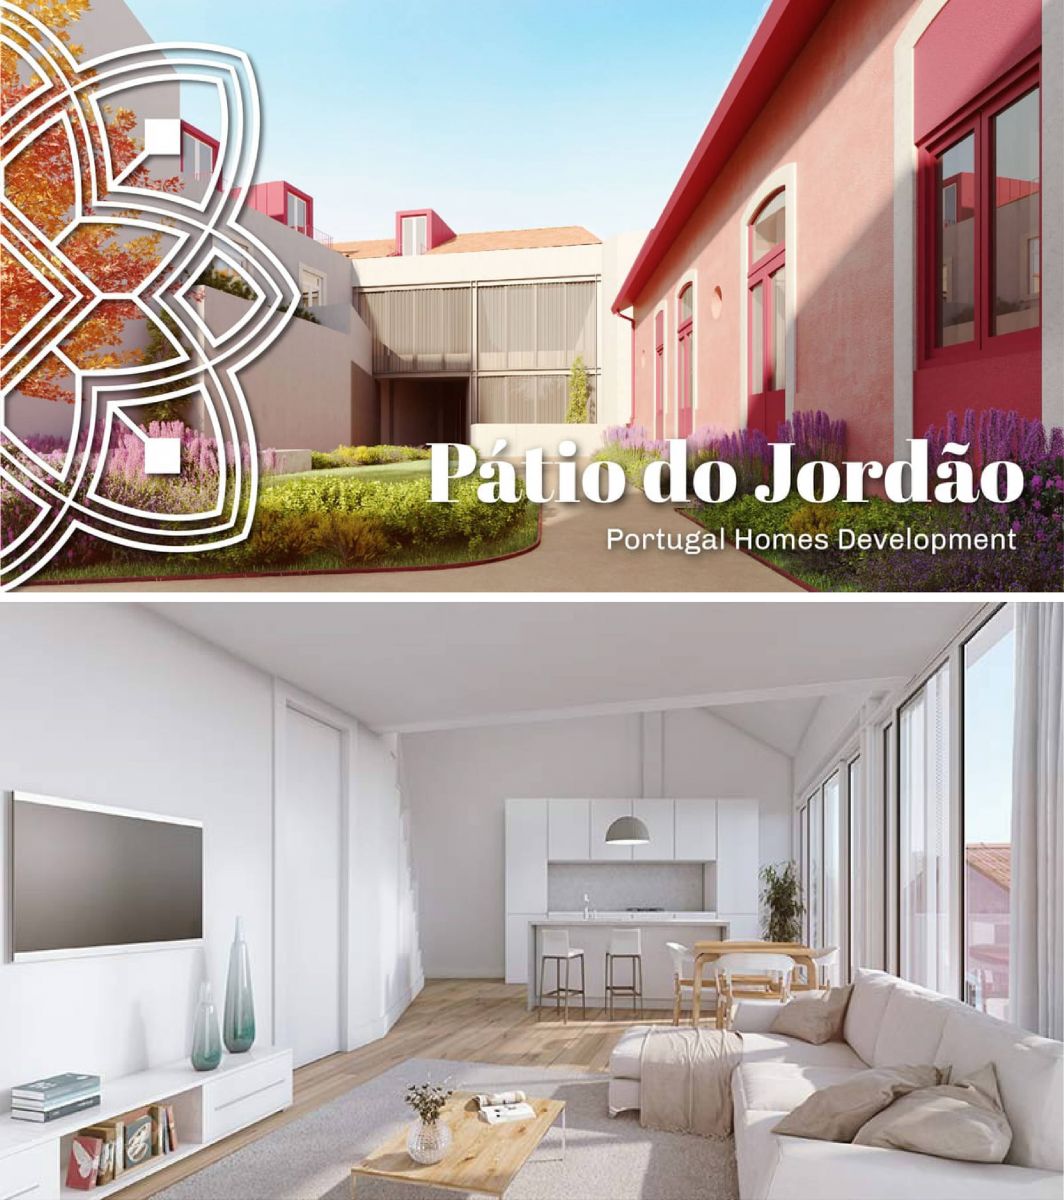 Property Developments for Investment in Portugal by Portugal Homes, part of Harland & Poston Group